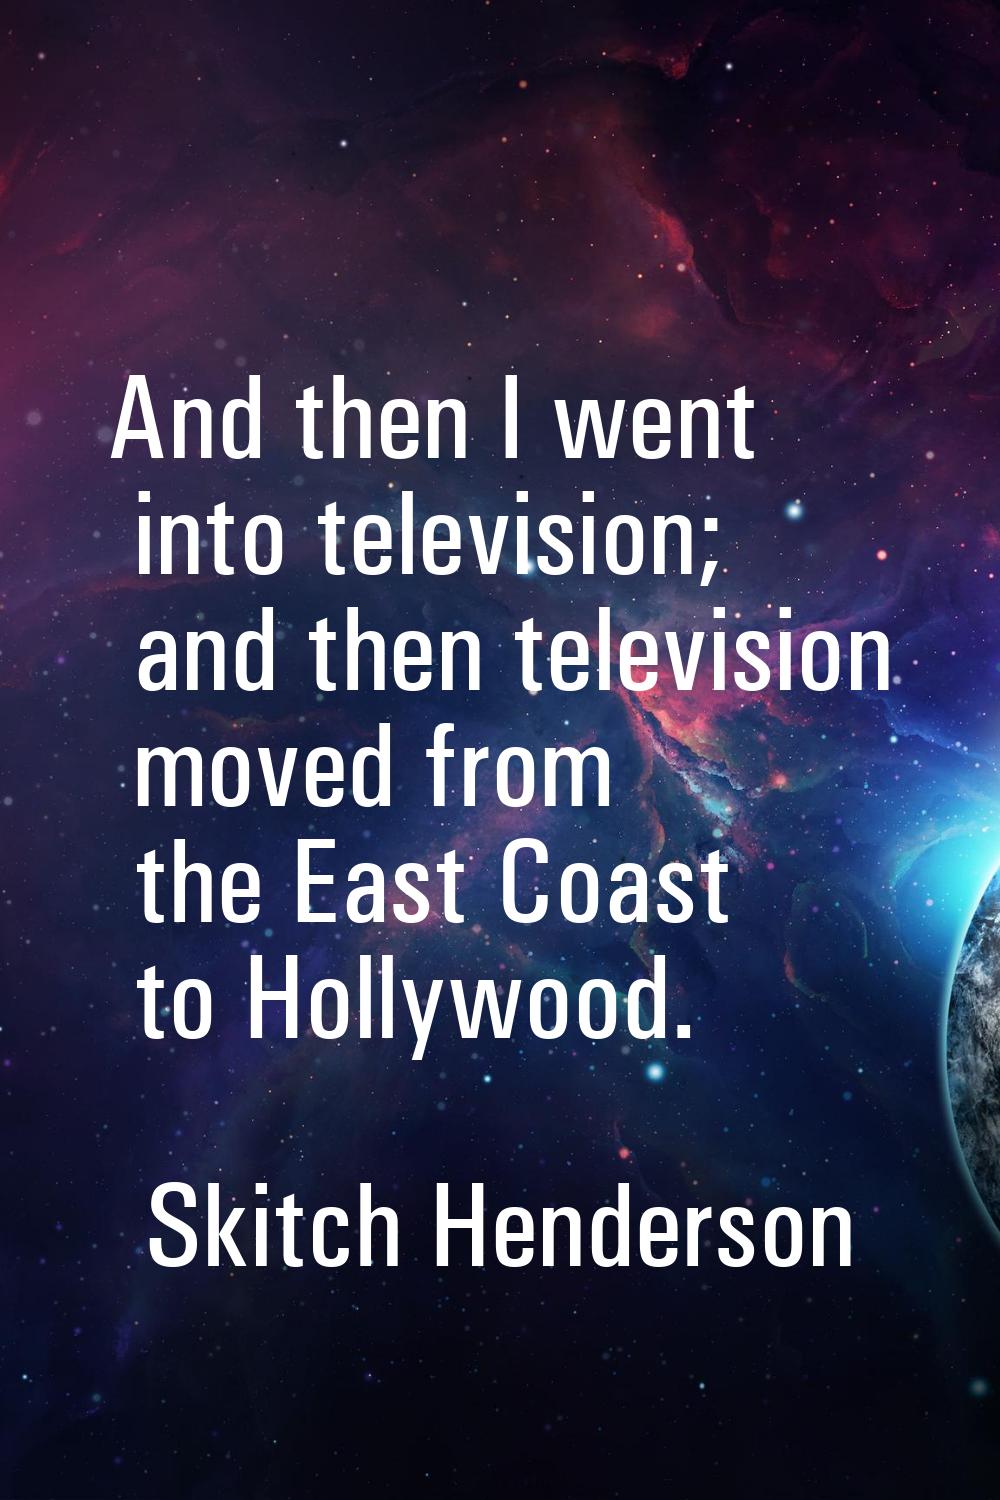 And then I went into television; and then television moved from the East Coast to Hollywood.